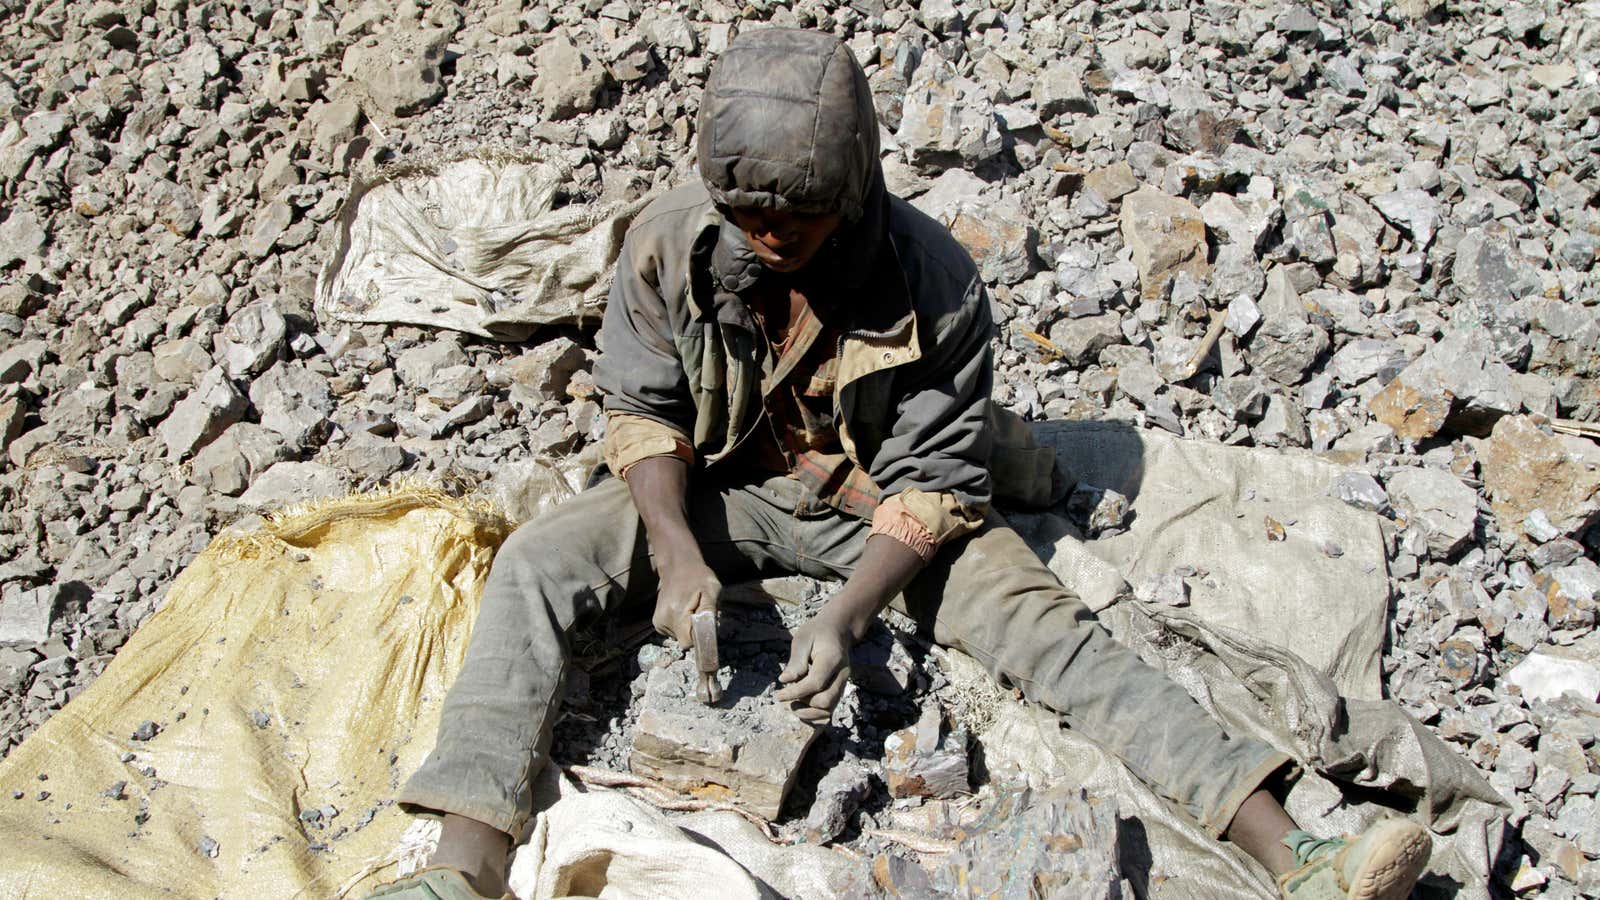 Small-scale cobalt miners in the Democratic Republic of the Congo often work in dangerous, underpaid conditions.